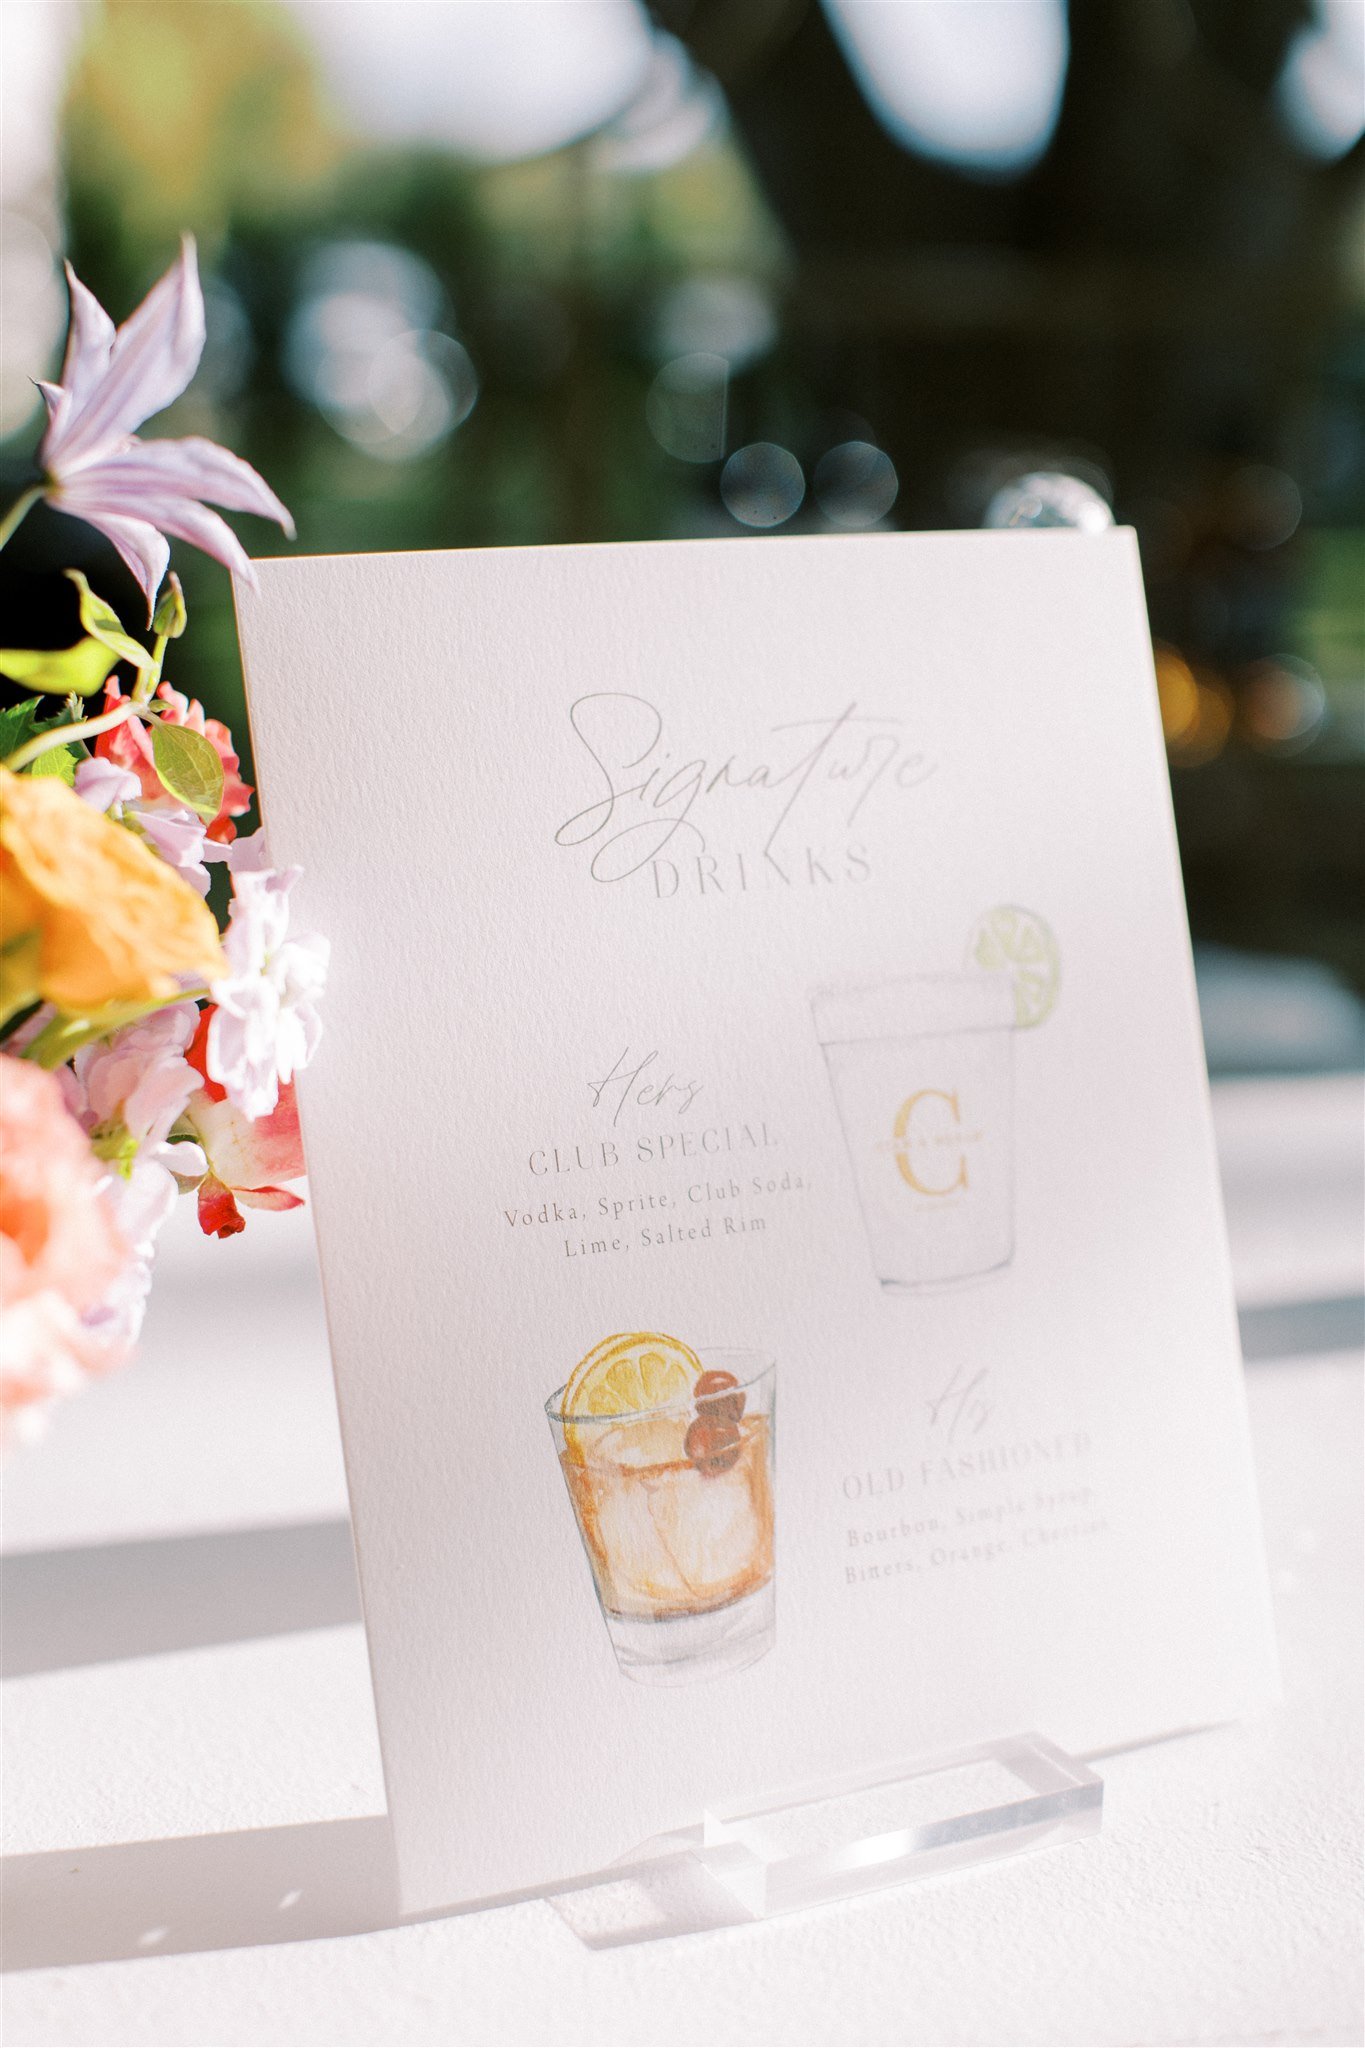 Pink-Champagne-Designs-custom-drink-and-bar-signs-for-modern-weddings